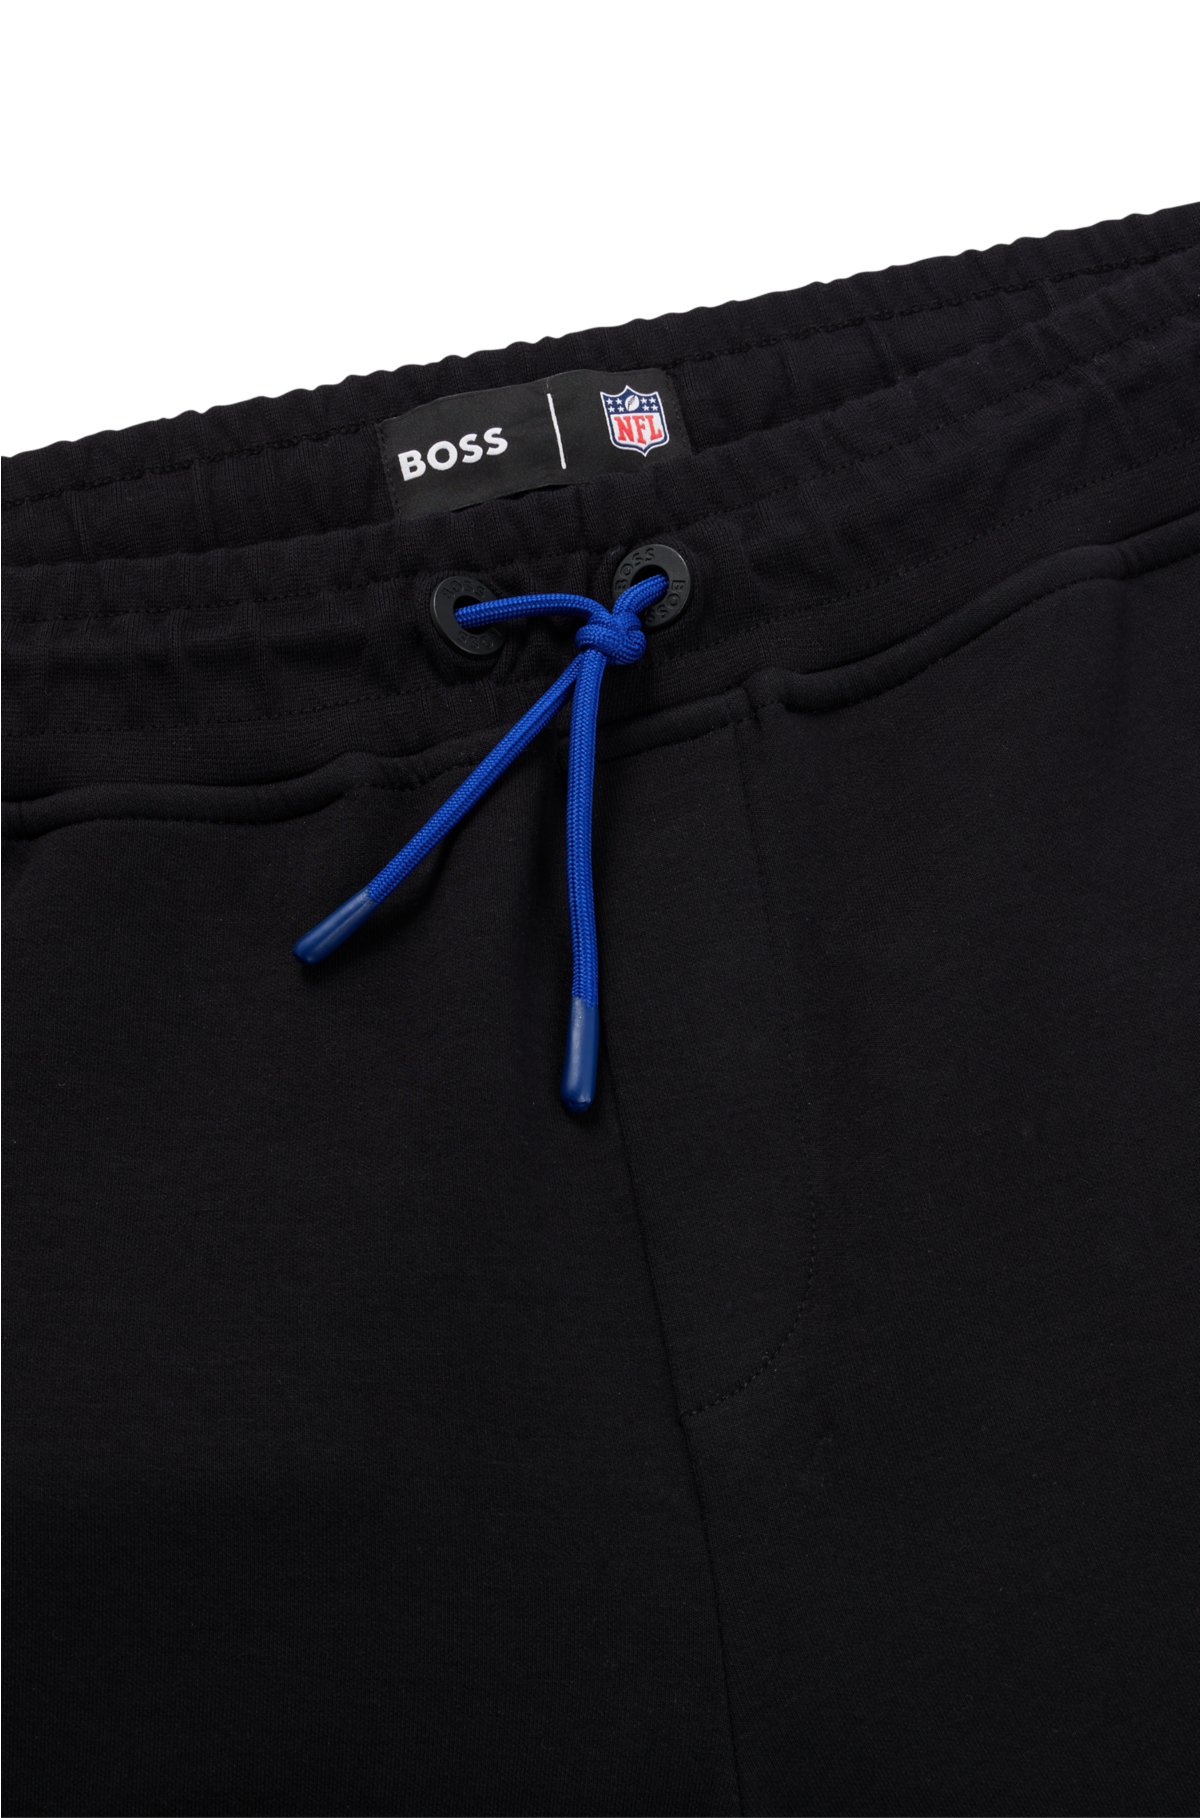 BOSS by HUGO BOSS X Nba Cotton-blend Tracksuit Bottoms With Colourful  Branding in Black for Men